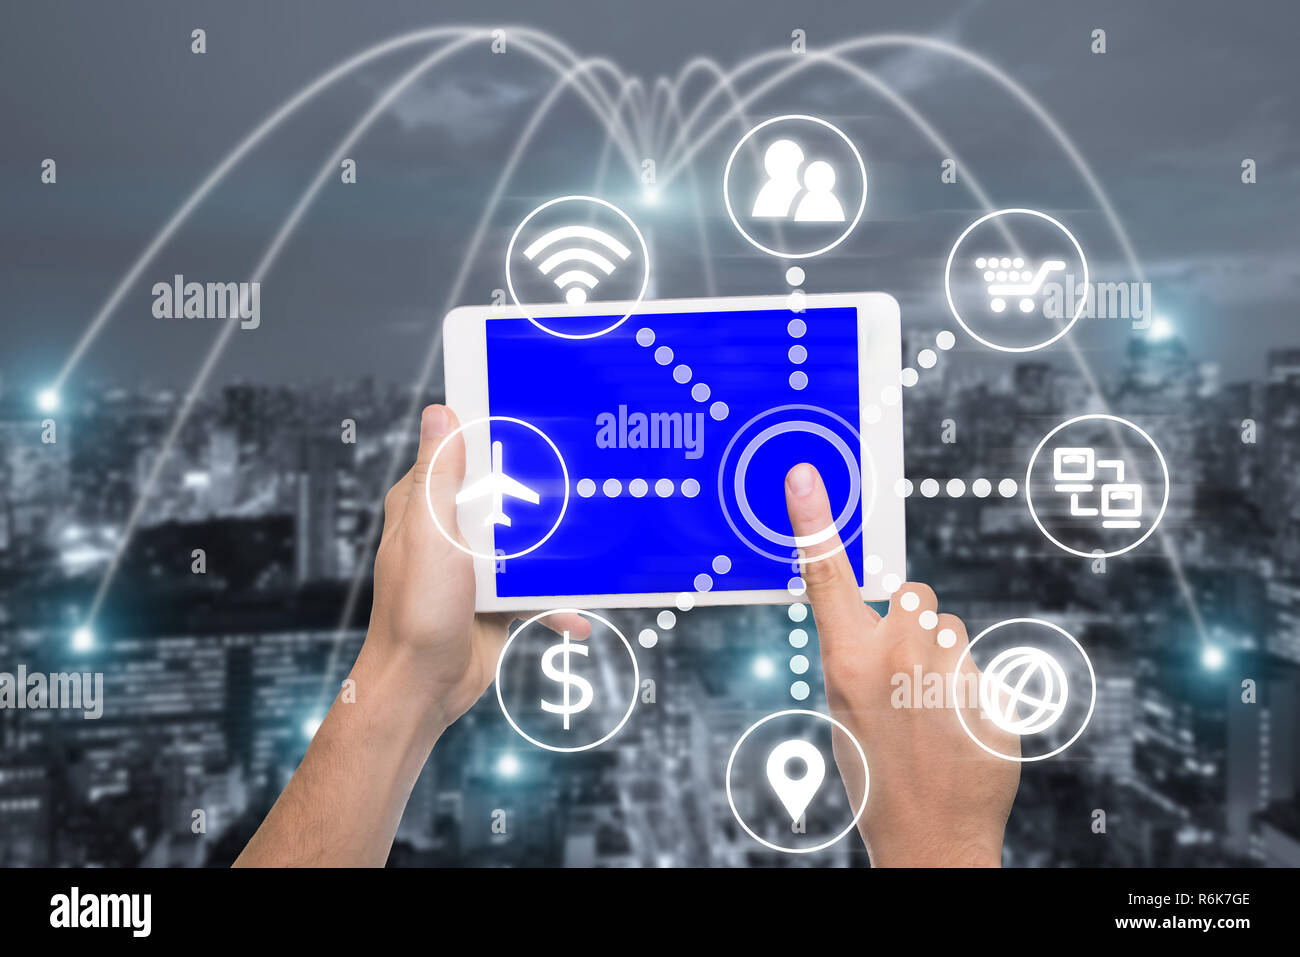 Hand holding digital tablet with smart technology icon and Tokyo city with network connection concept, Tokyo smart city and wireless communication net Stock Photo